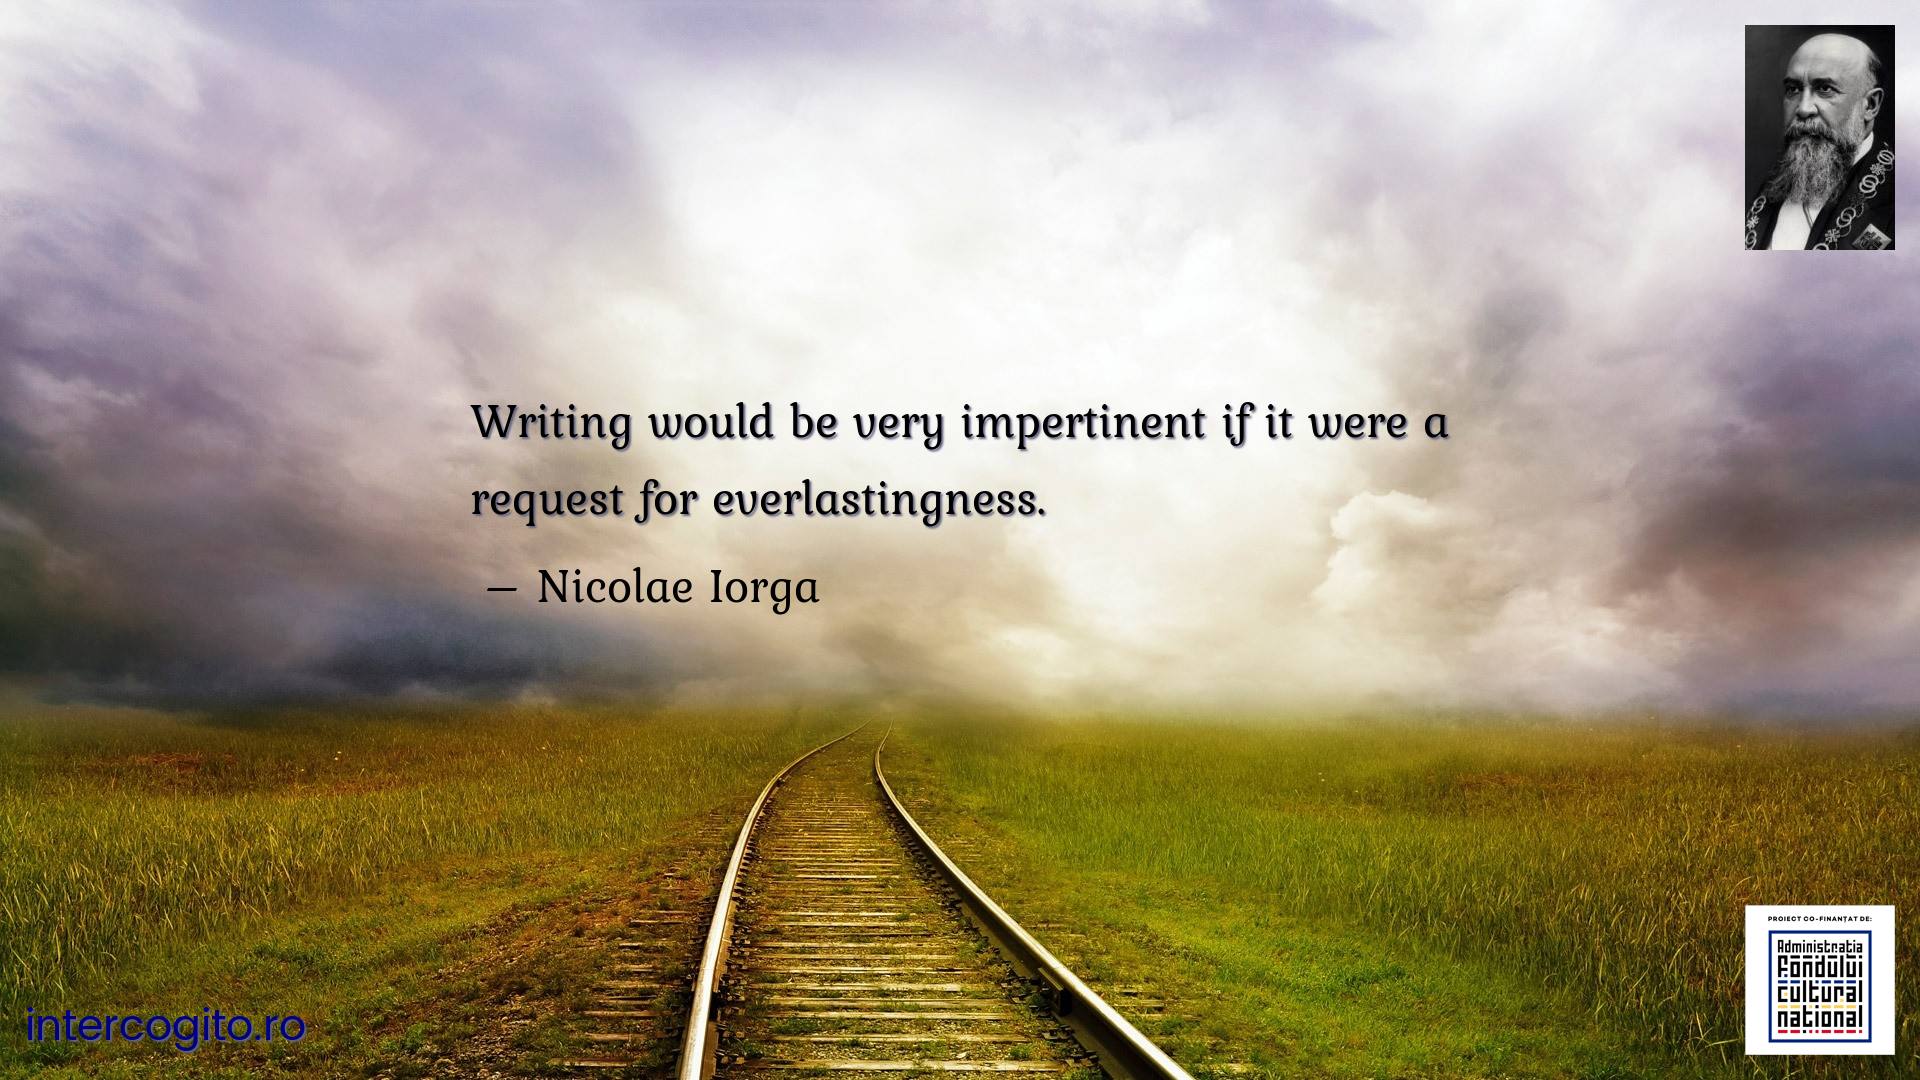 Writing would be very impertinent if it were a request for everlastingness.